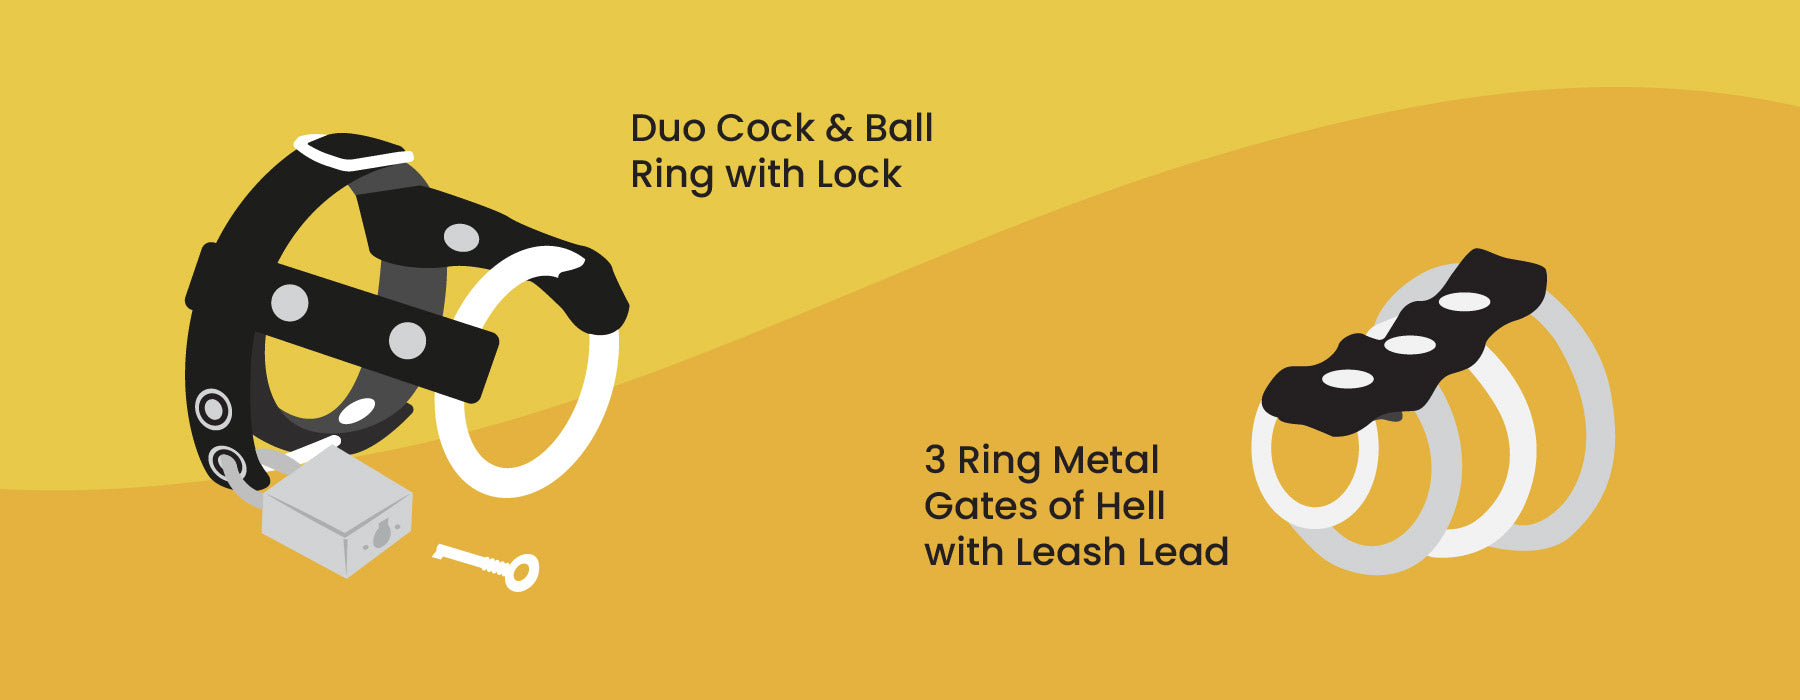 Duo Cock & Ball Ring with Lock and 3 Ring Metal Gates of Hell with Leash Lead